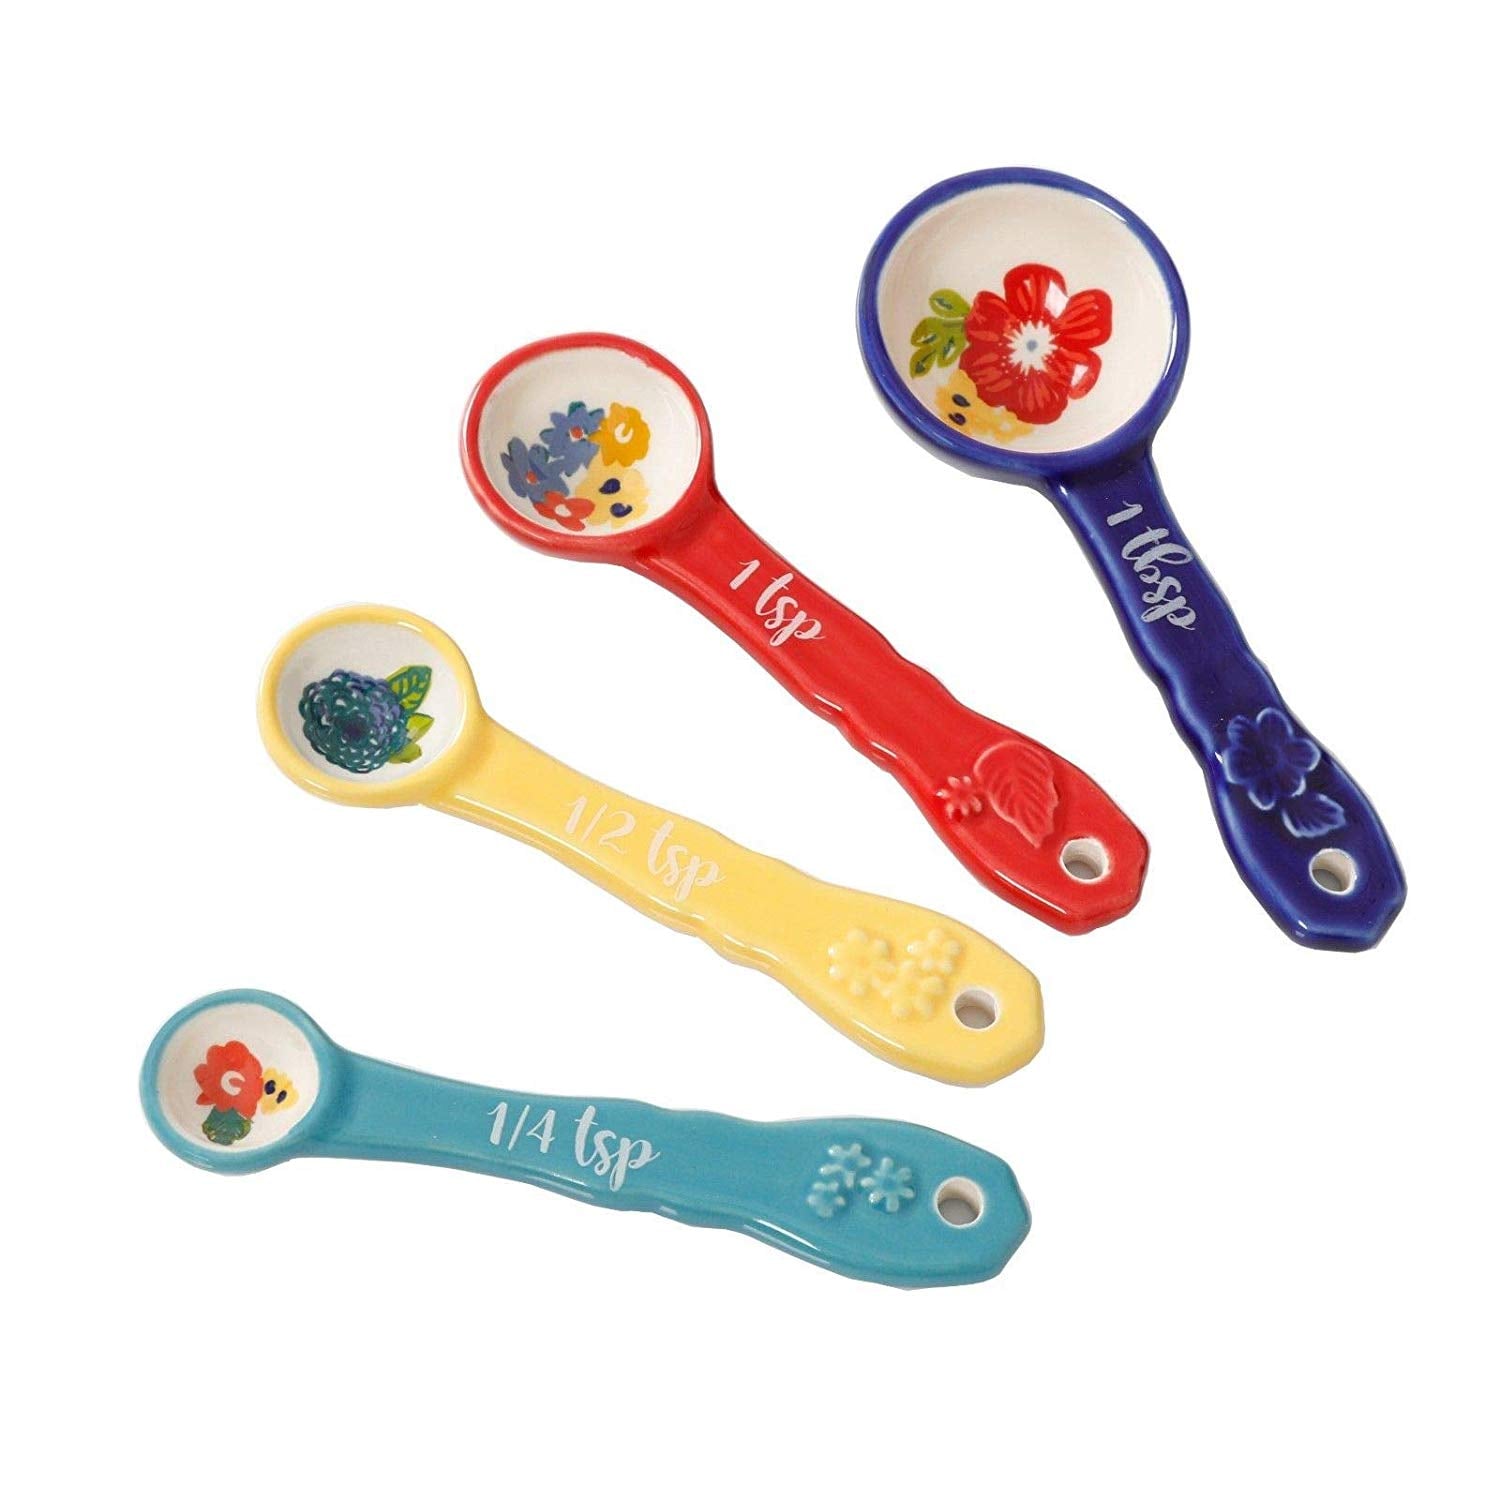 Came across these adorable measuring spoons and just had to have